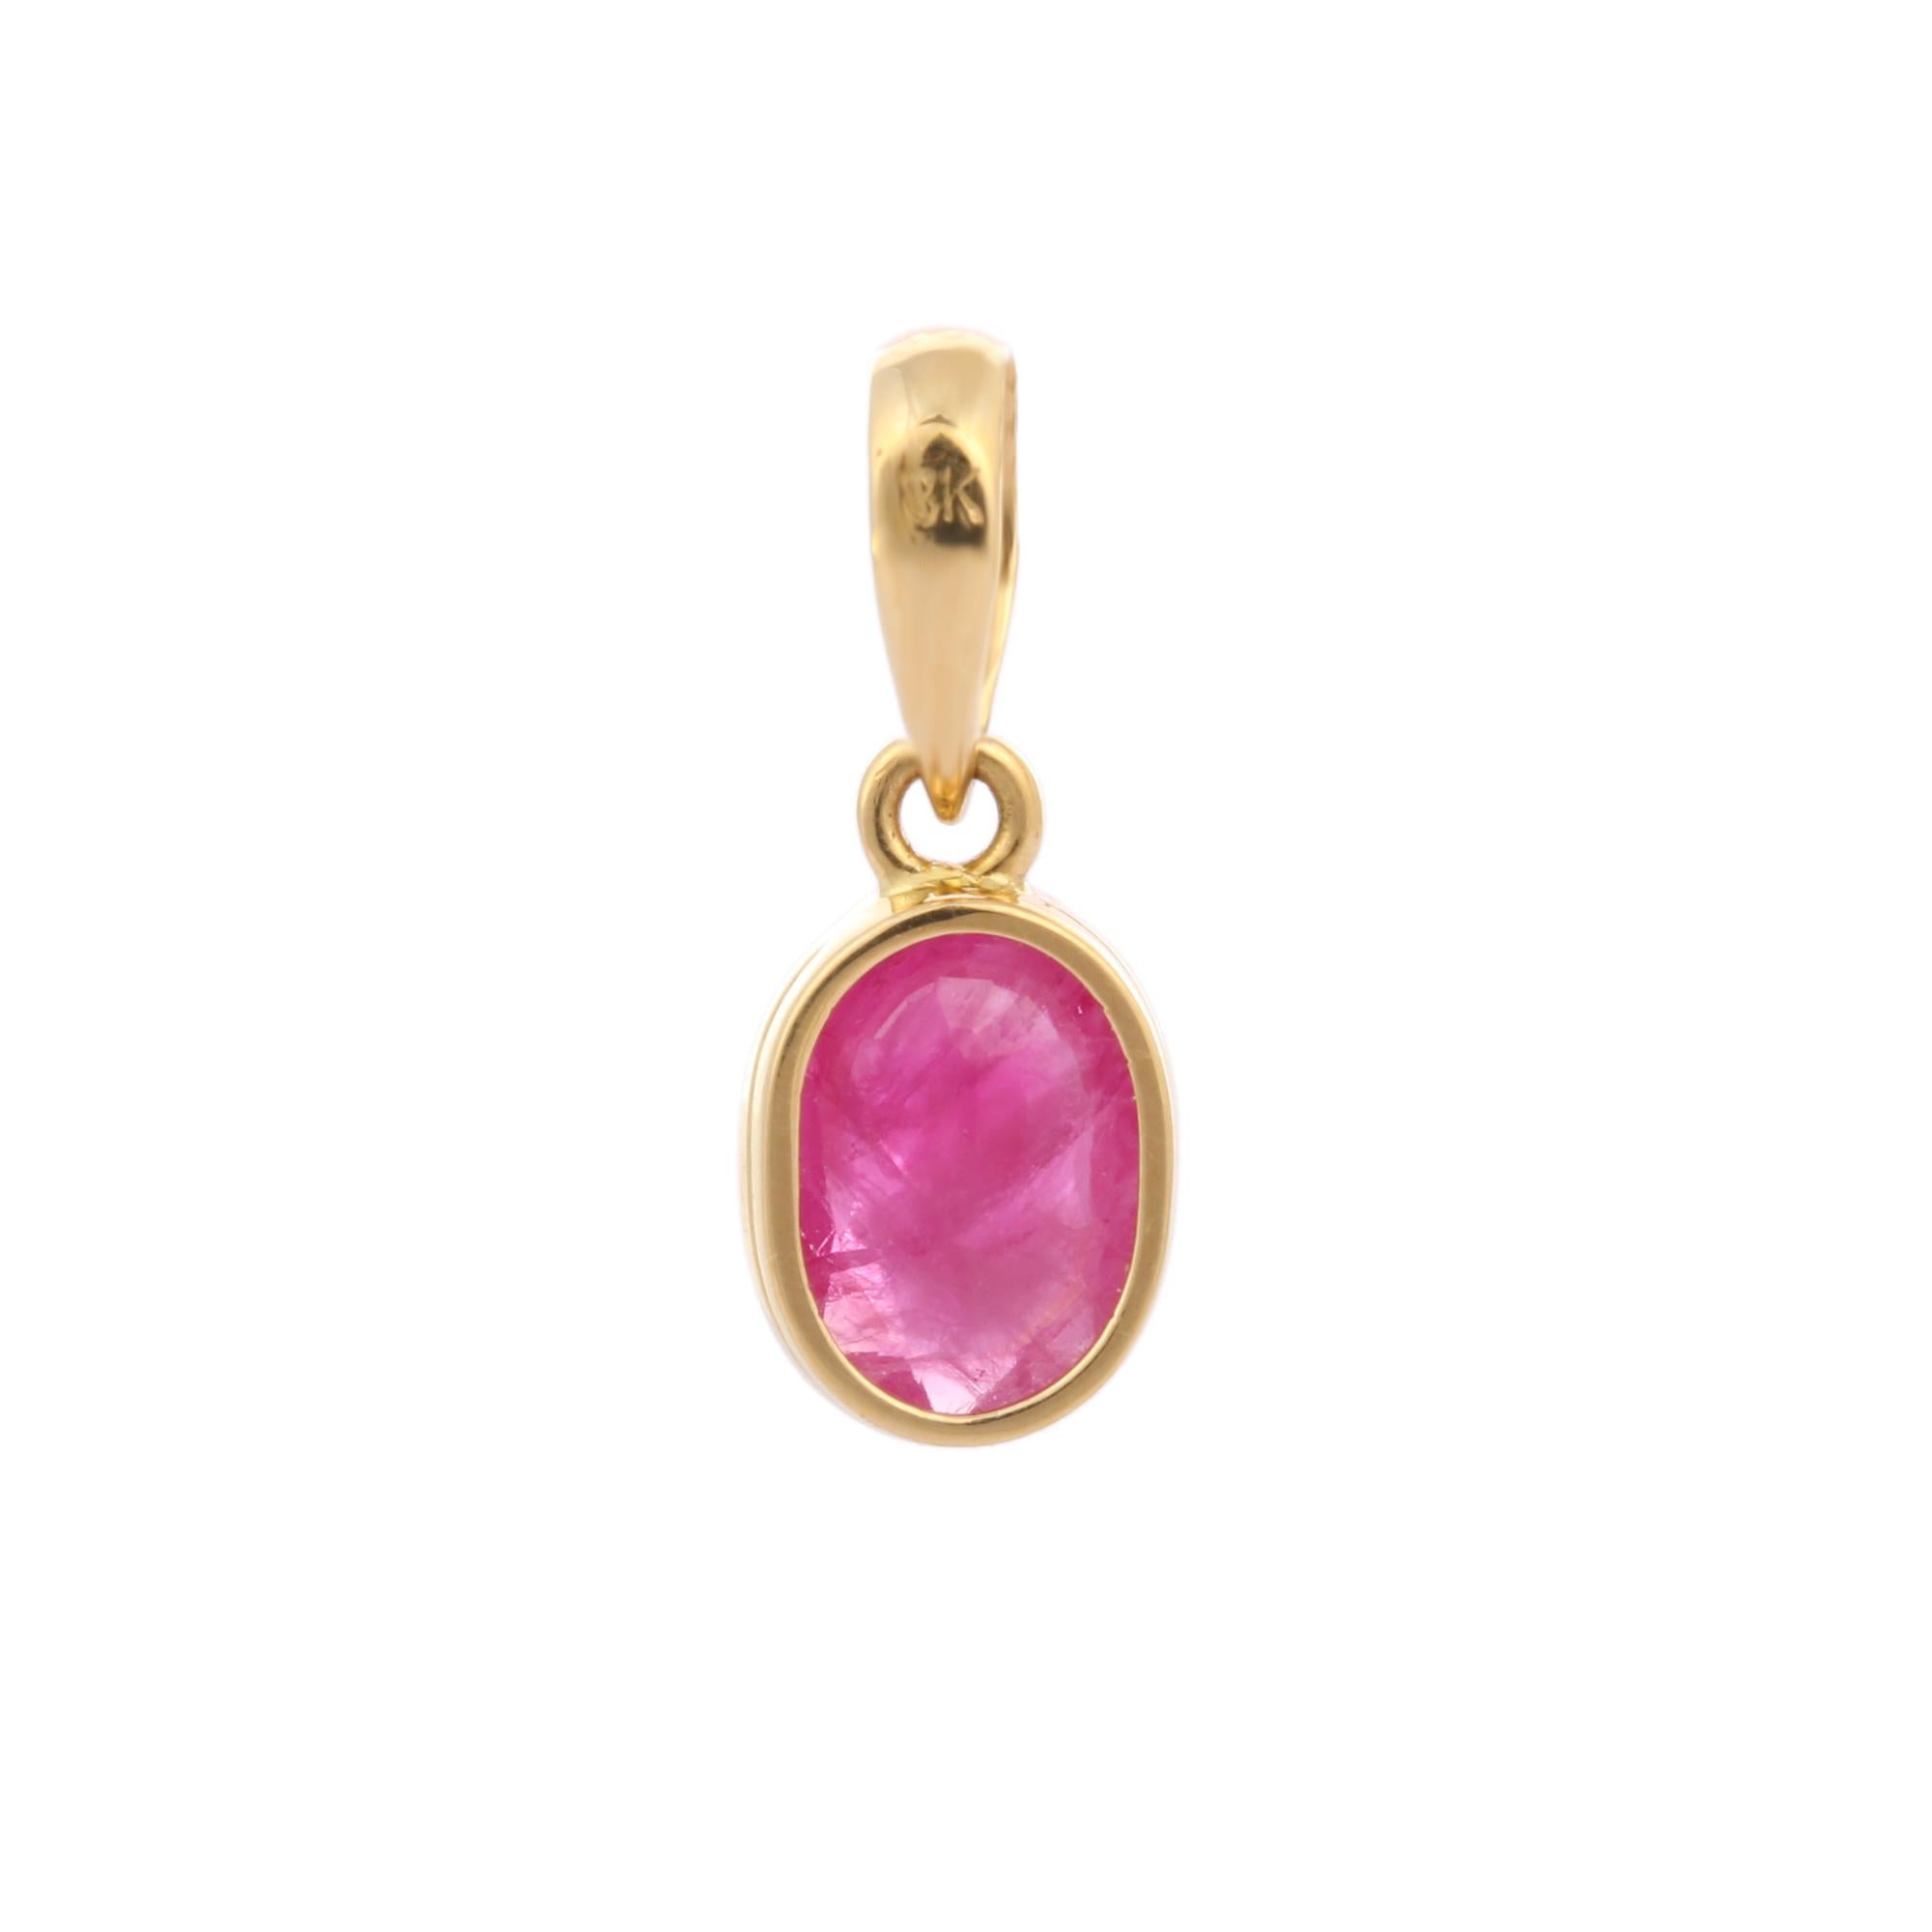 Classic ruby pendant in 18K Gold. It has a oval cut ruby that completes your look with a decent touch. Pendants are used to wear or gifted to represent love and promises. It's an attractive jewelry piece that goes with every basic outfit and wedding